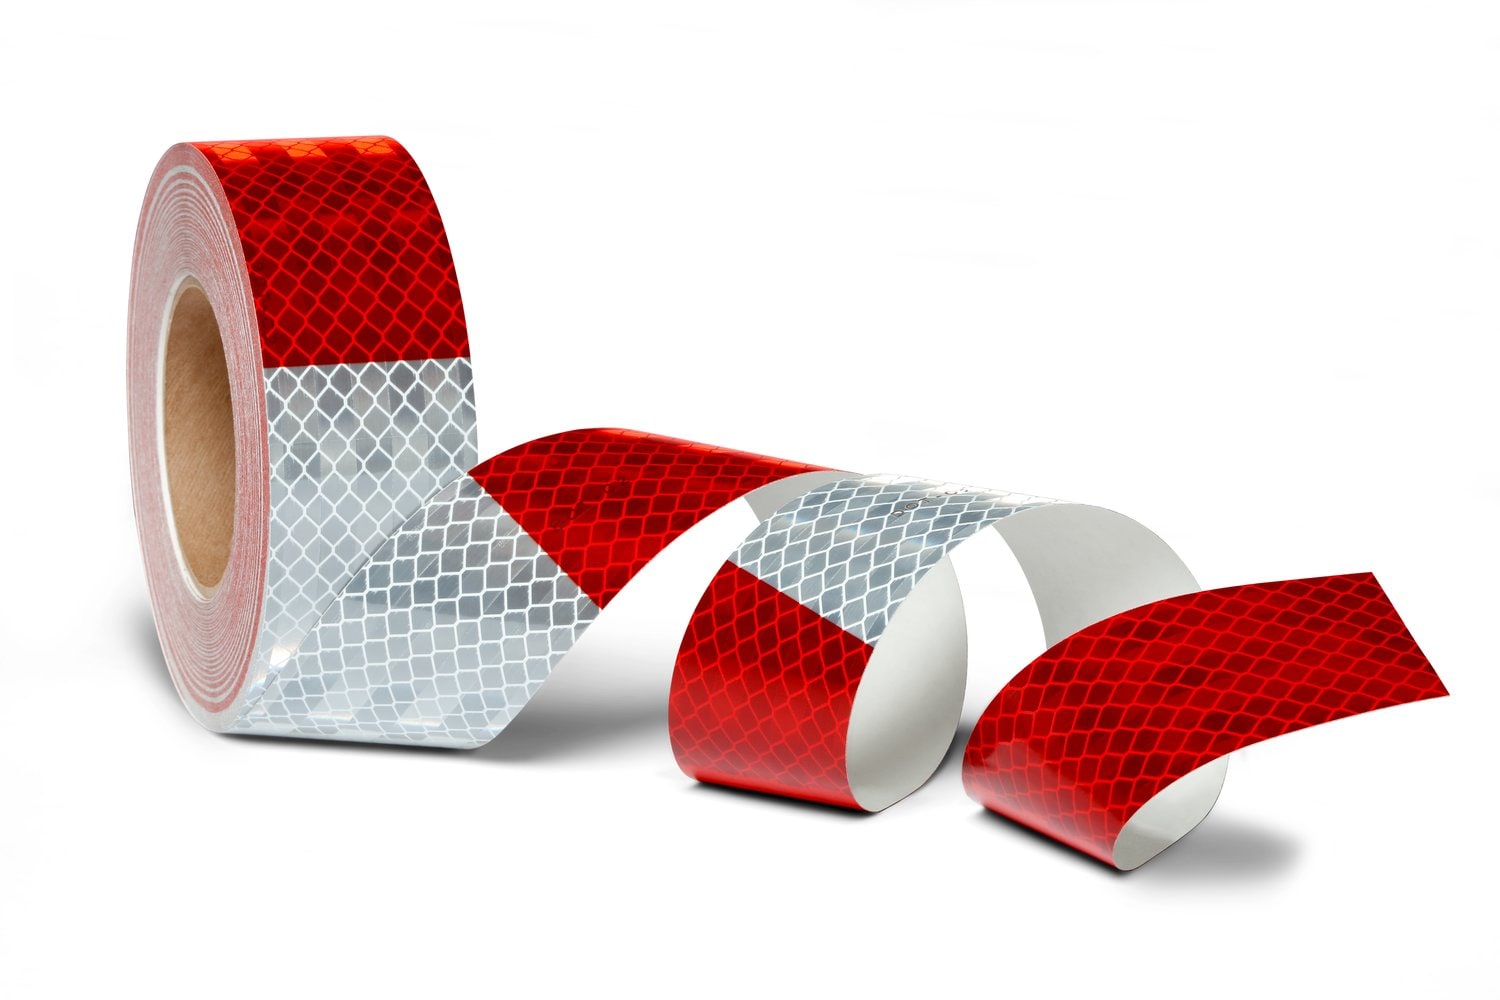 7100122483 - 3M Flexible Prismatic Conspicuity Markings 913-326 Red/White, DOT,
Configurable Roll